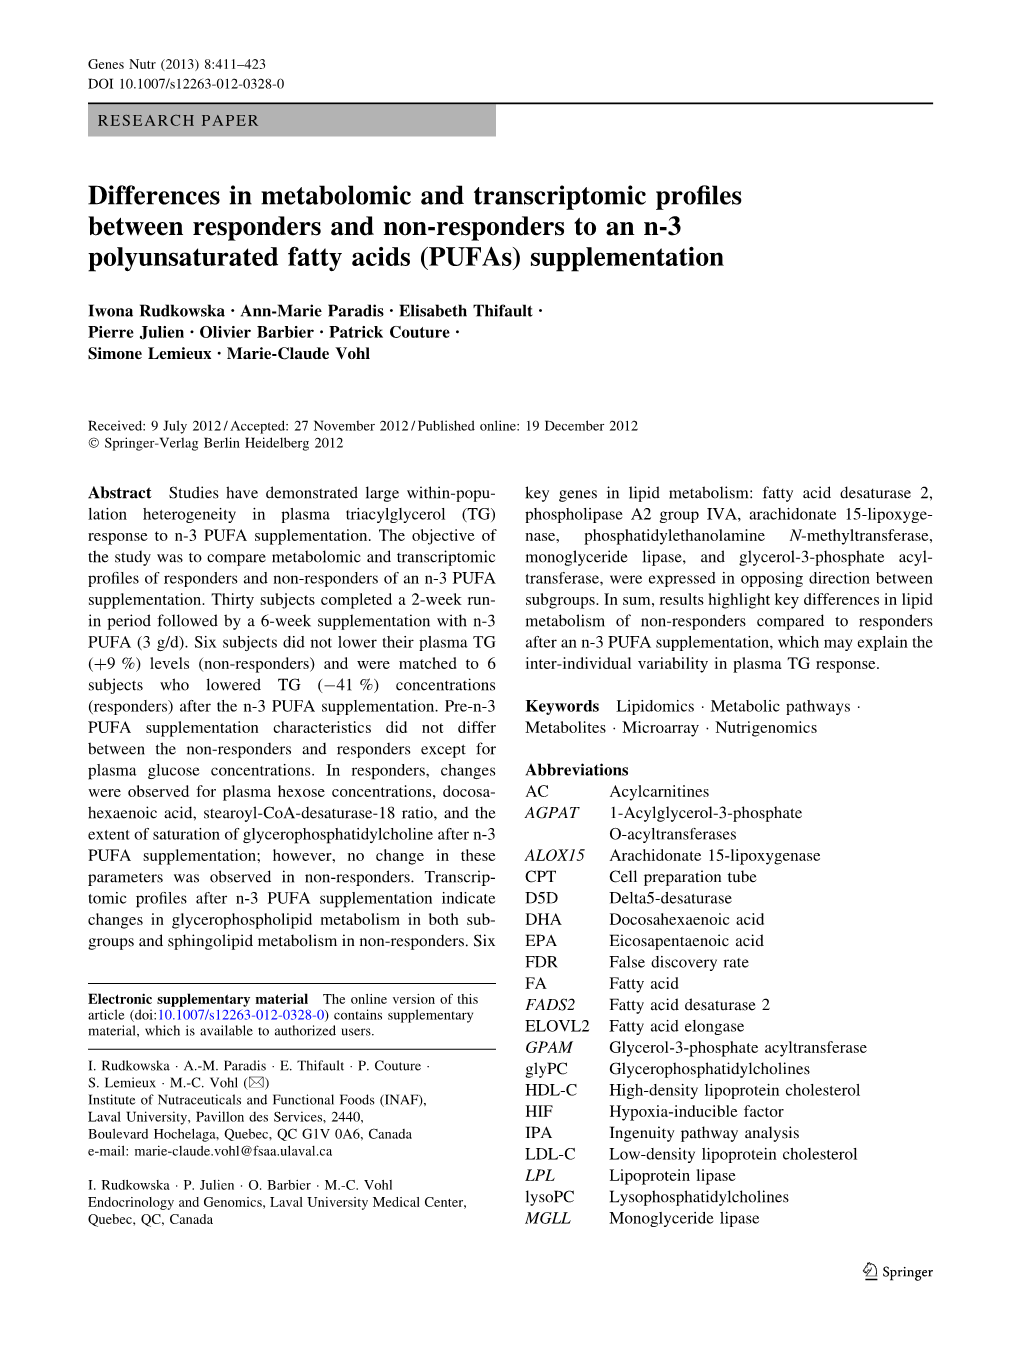 Differences in Metabolomic and Transcriptomic Profiles Between